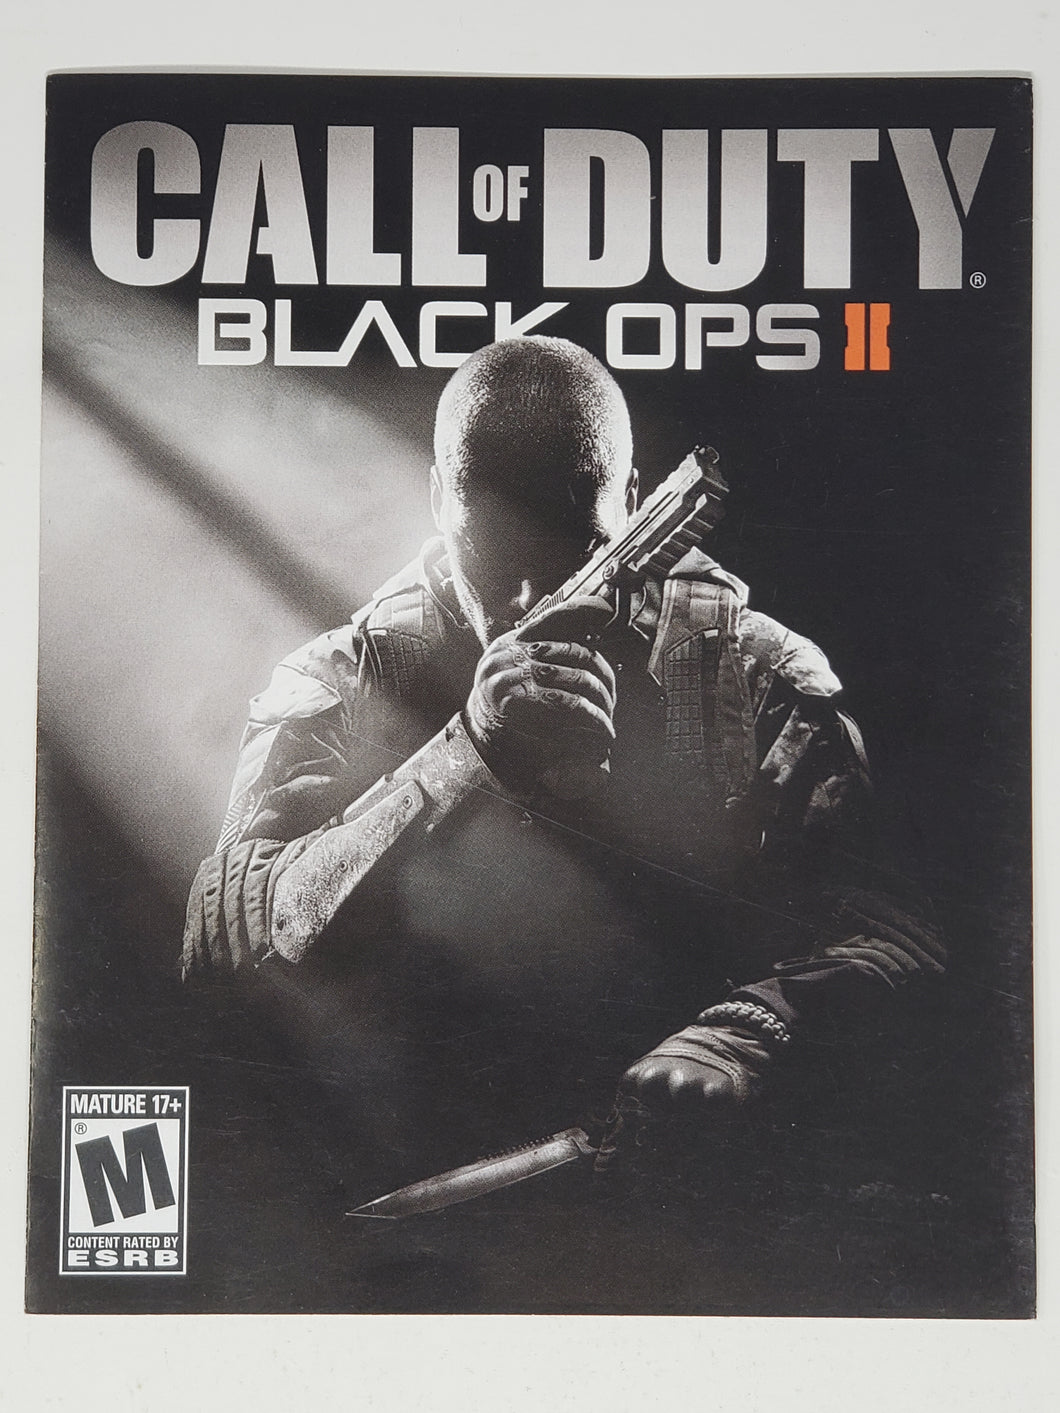 Call of Duty Black Ops II [Manuel] - Sony Playstation 3 | PS3